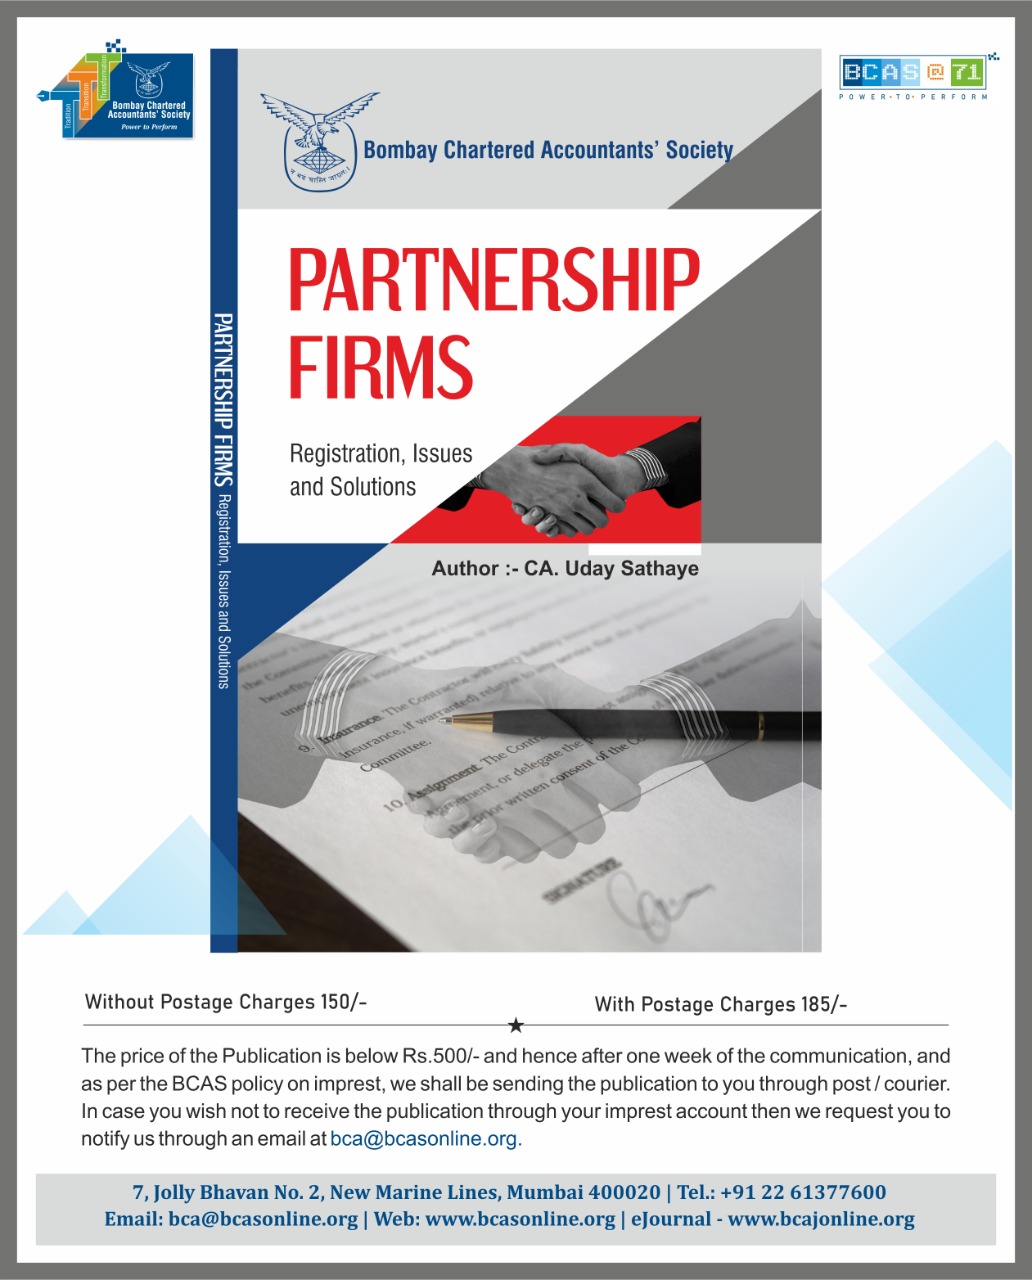 Partnership Firm – Registration, Issues and Solutions